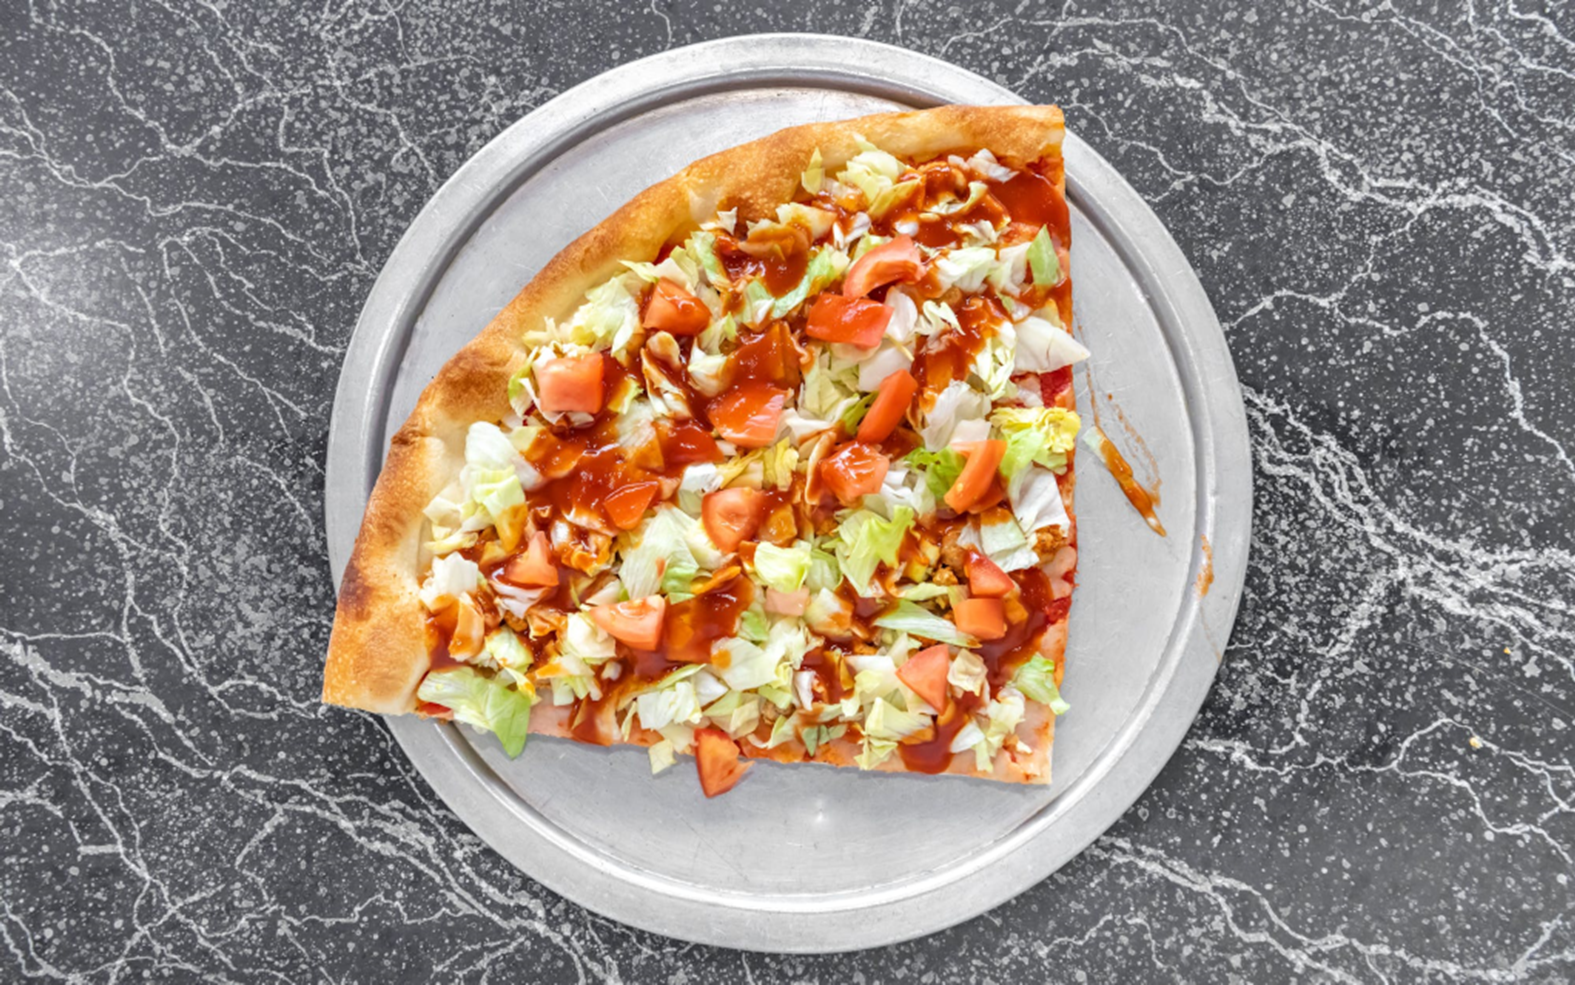 A slice of pizza topped with diced tomatoes and shredded lettuce on a metal tray, placed on a mottled gray surface.